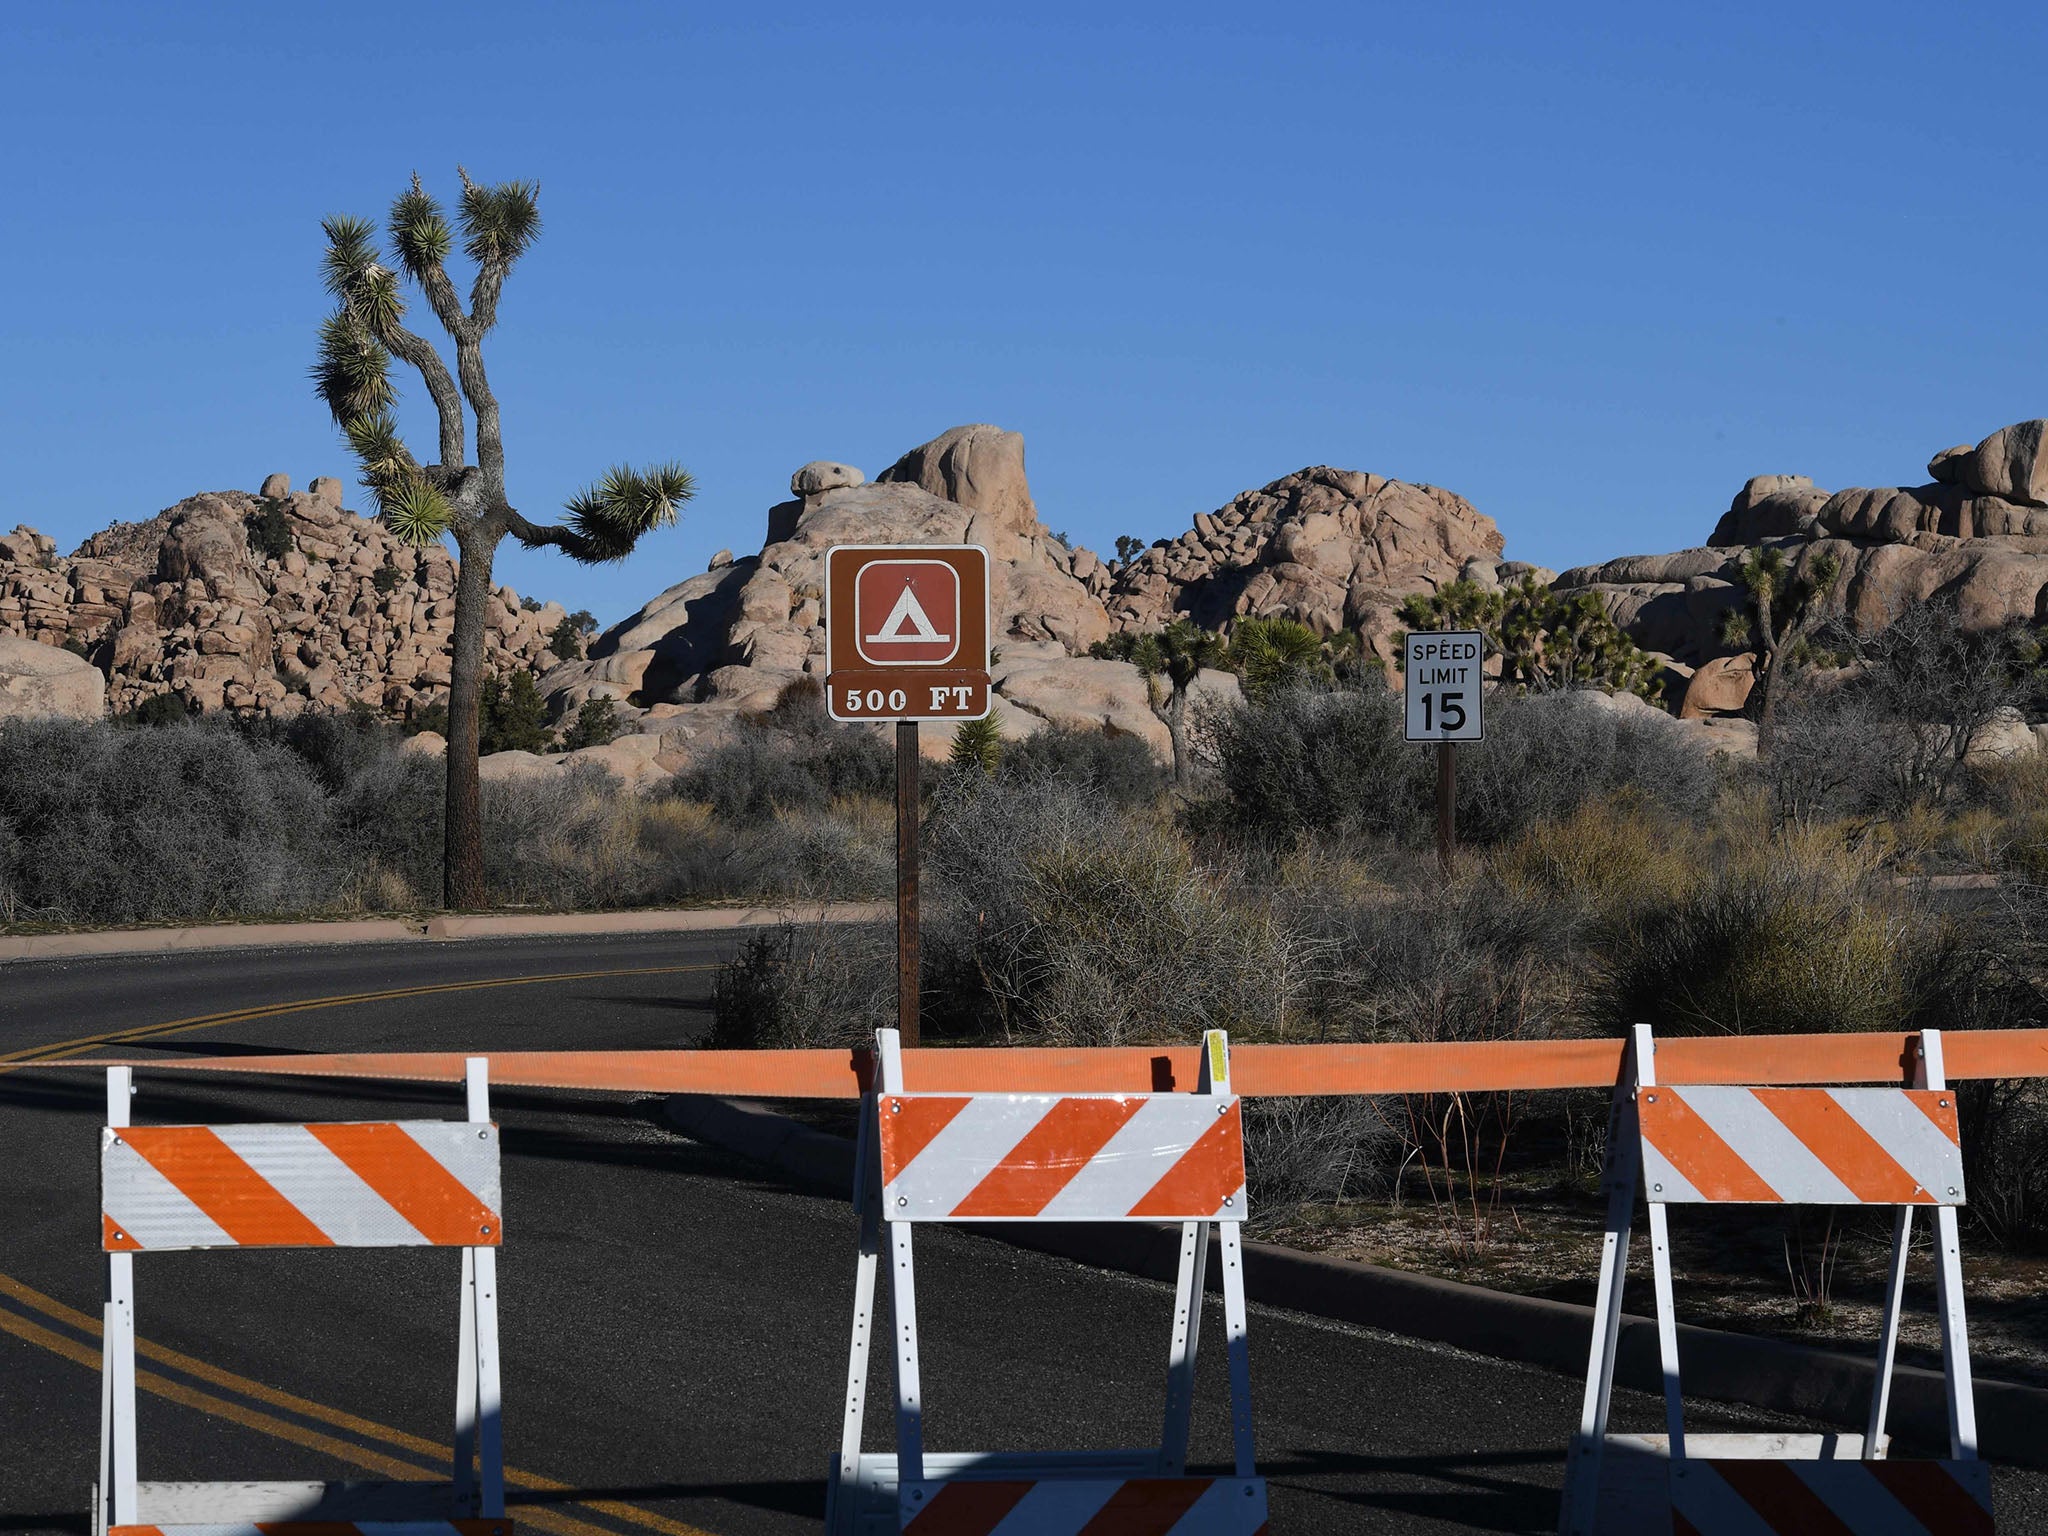 Much of the Joshua Tree National Park closed because of damage done to the nature after the government shutdown left it unsupervised (AFP/Getty)